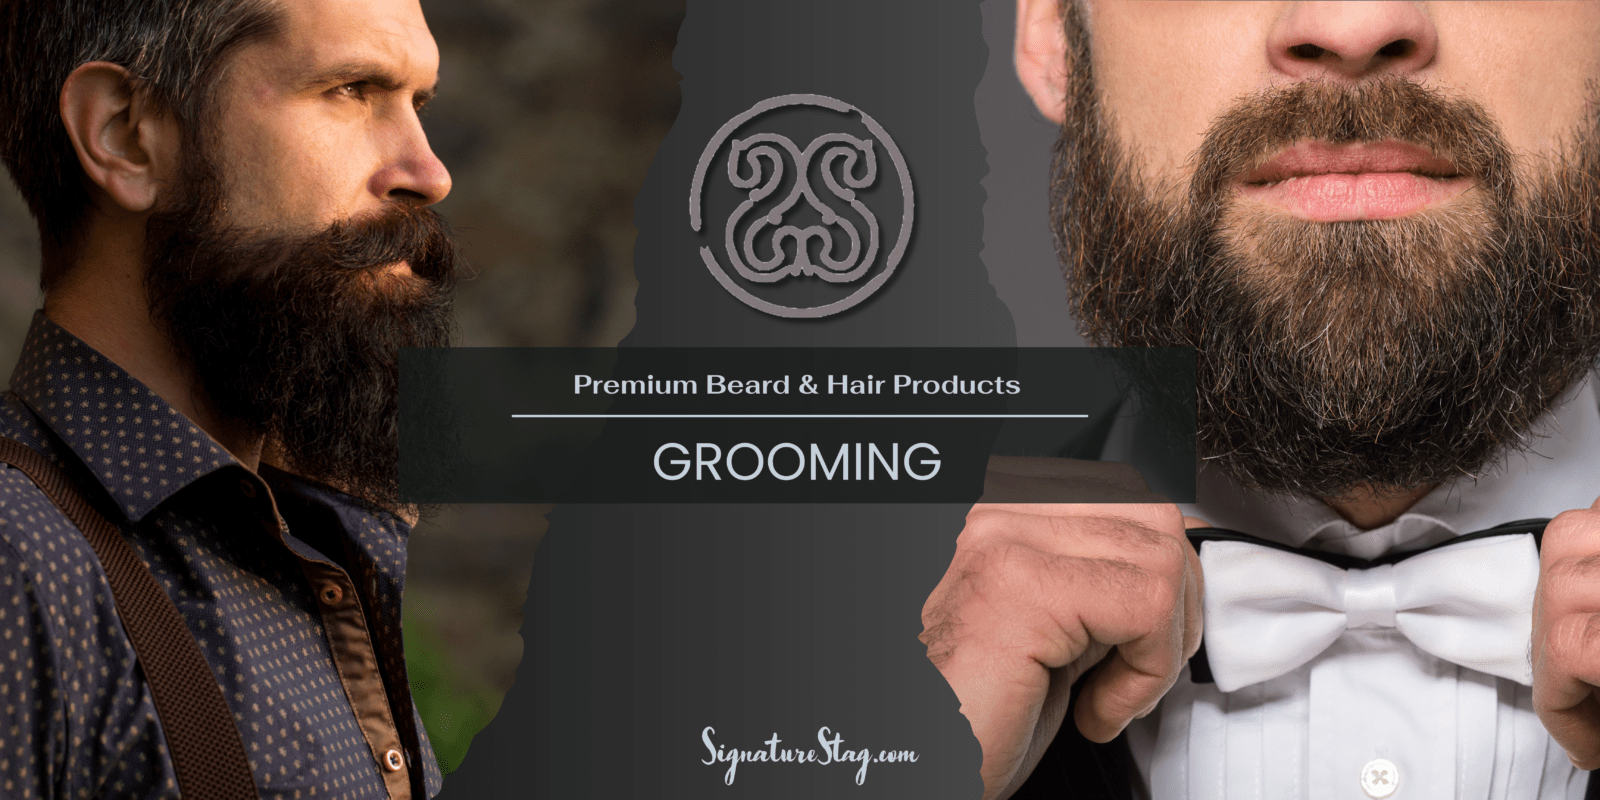 Find Beard & Hair Grooming Products in Lubbock and Midland Texas. Keep your Beard conditioned and looking gloriously handsome.